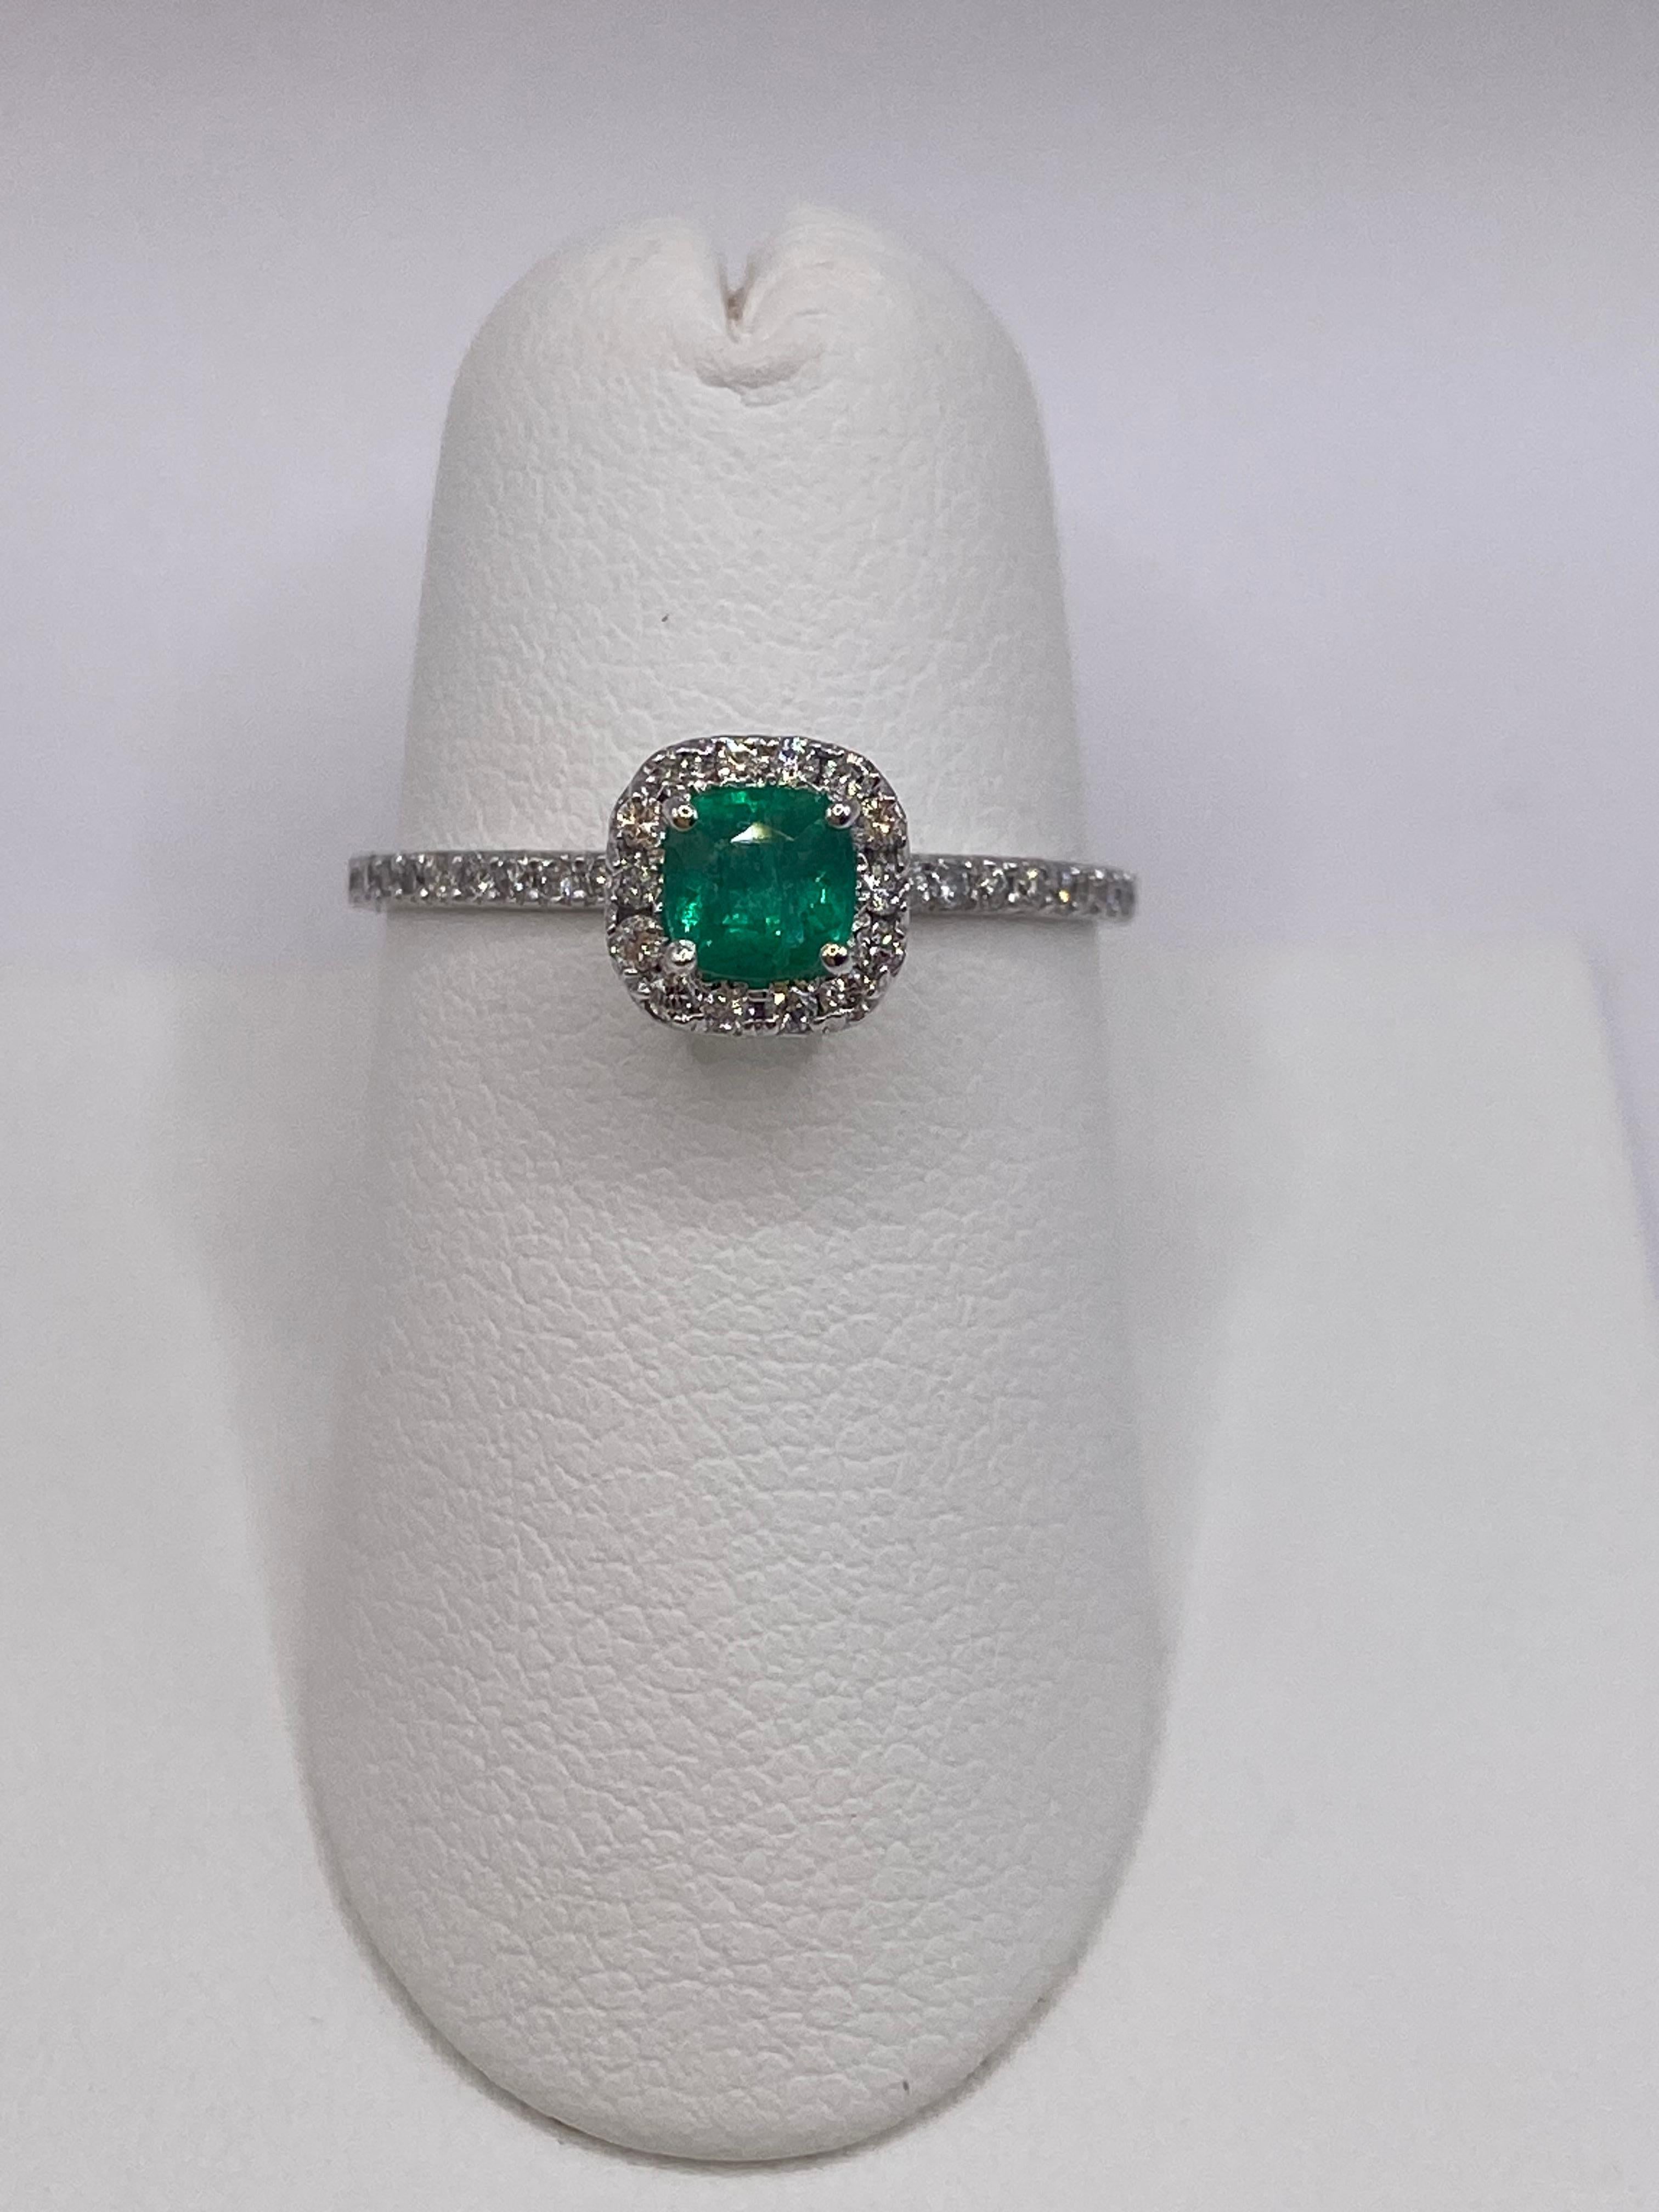 0.59ctw Cushion Cut Emerald & Round Diamond Petite Ring in 14KT White Gold For Sale 1